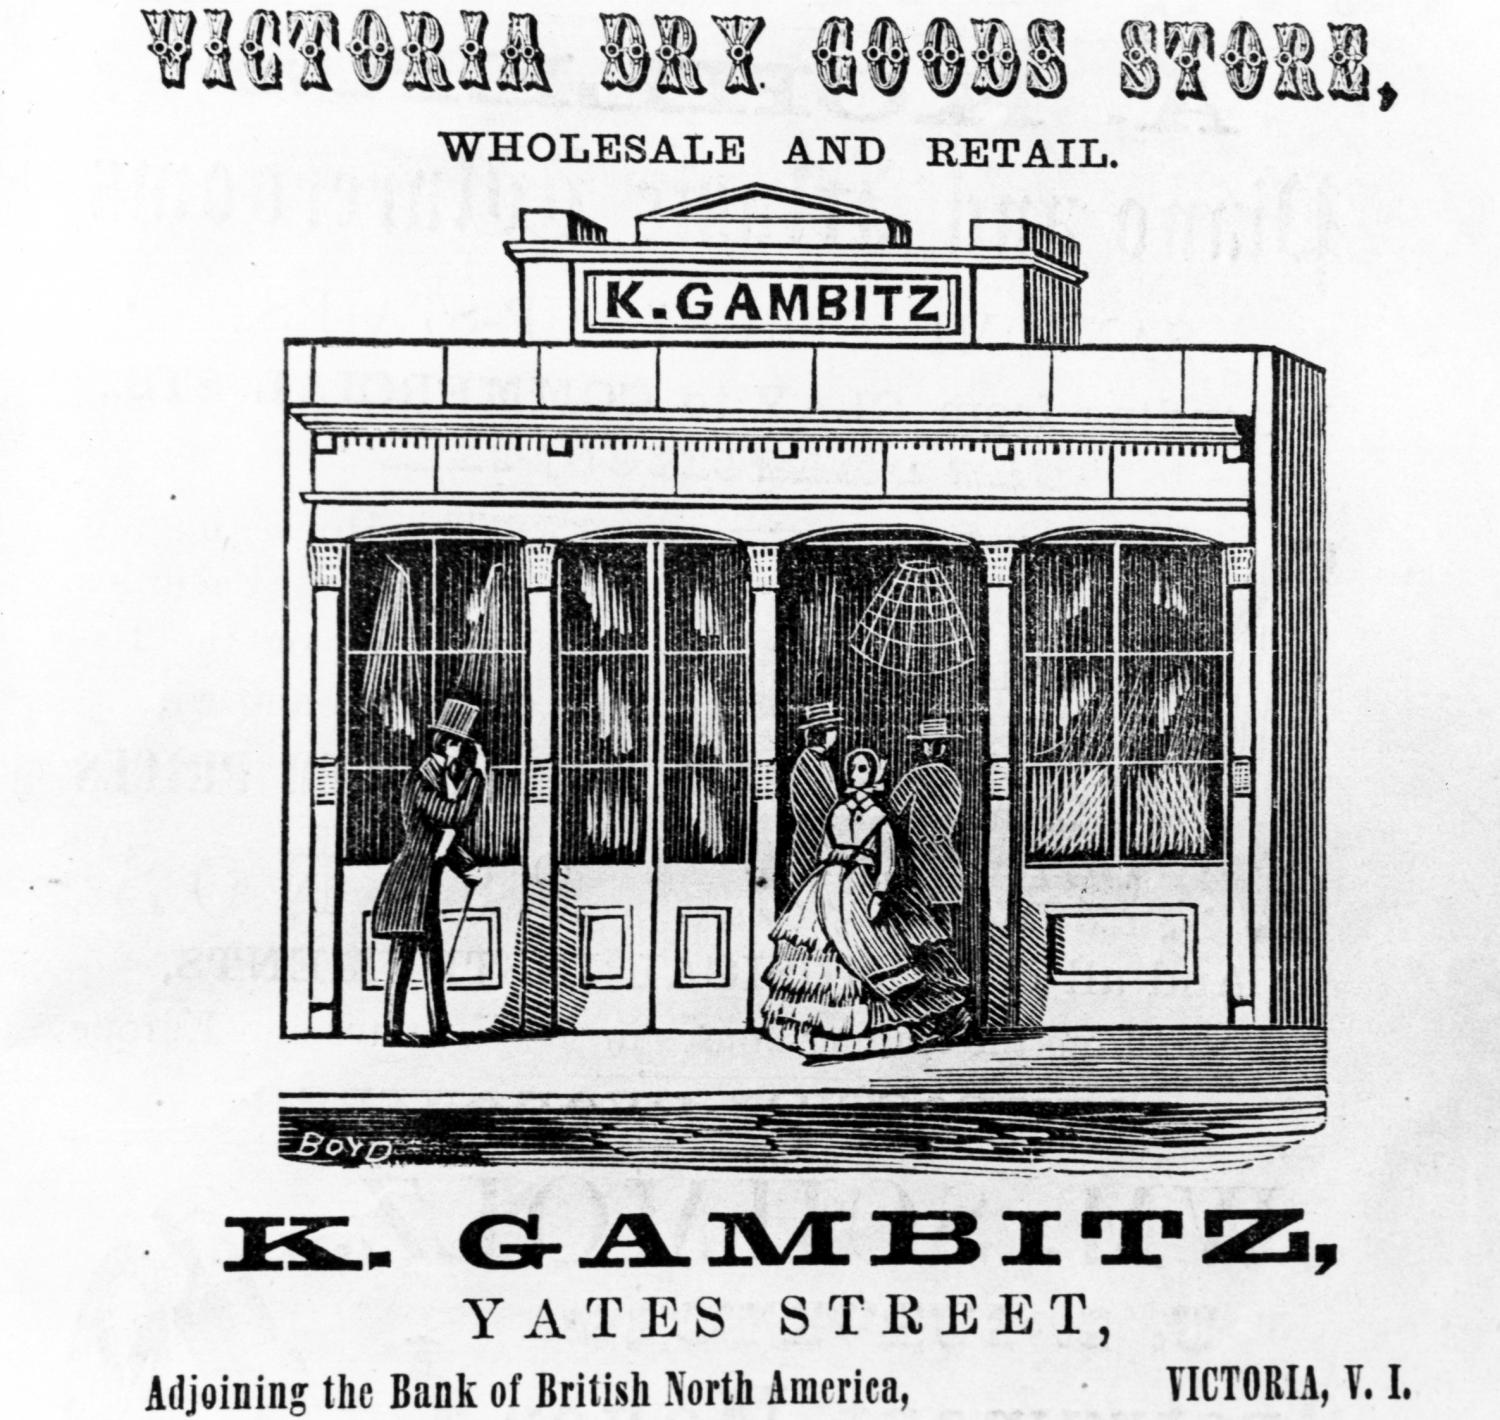 An print advertisement for Victoria Dry Goods Store, featuring people walking into a store in Victoria.